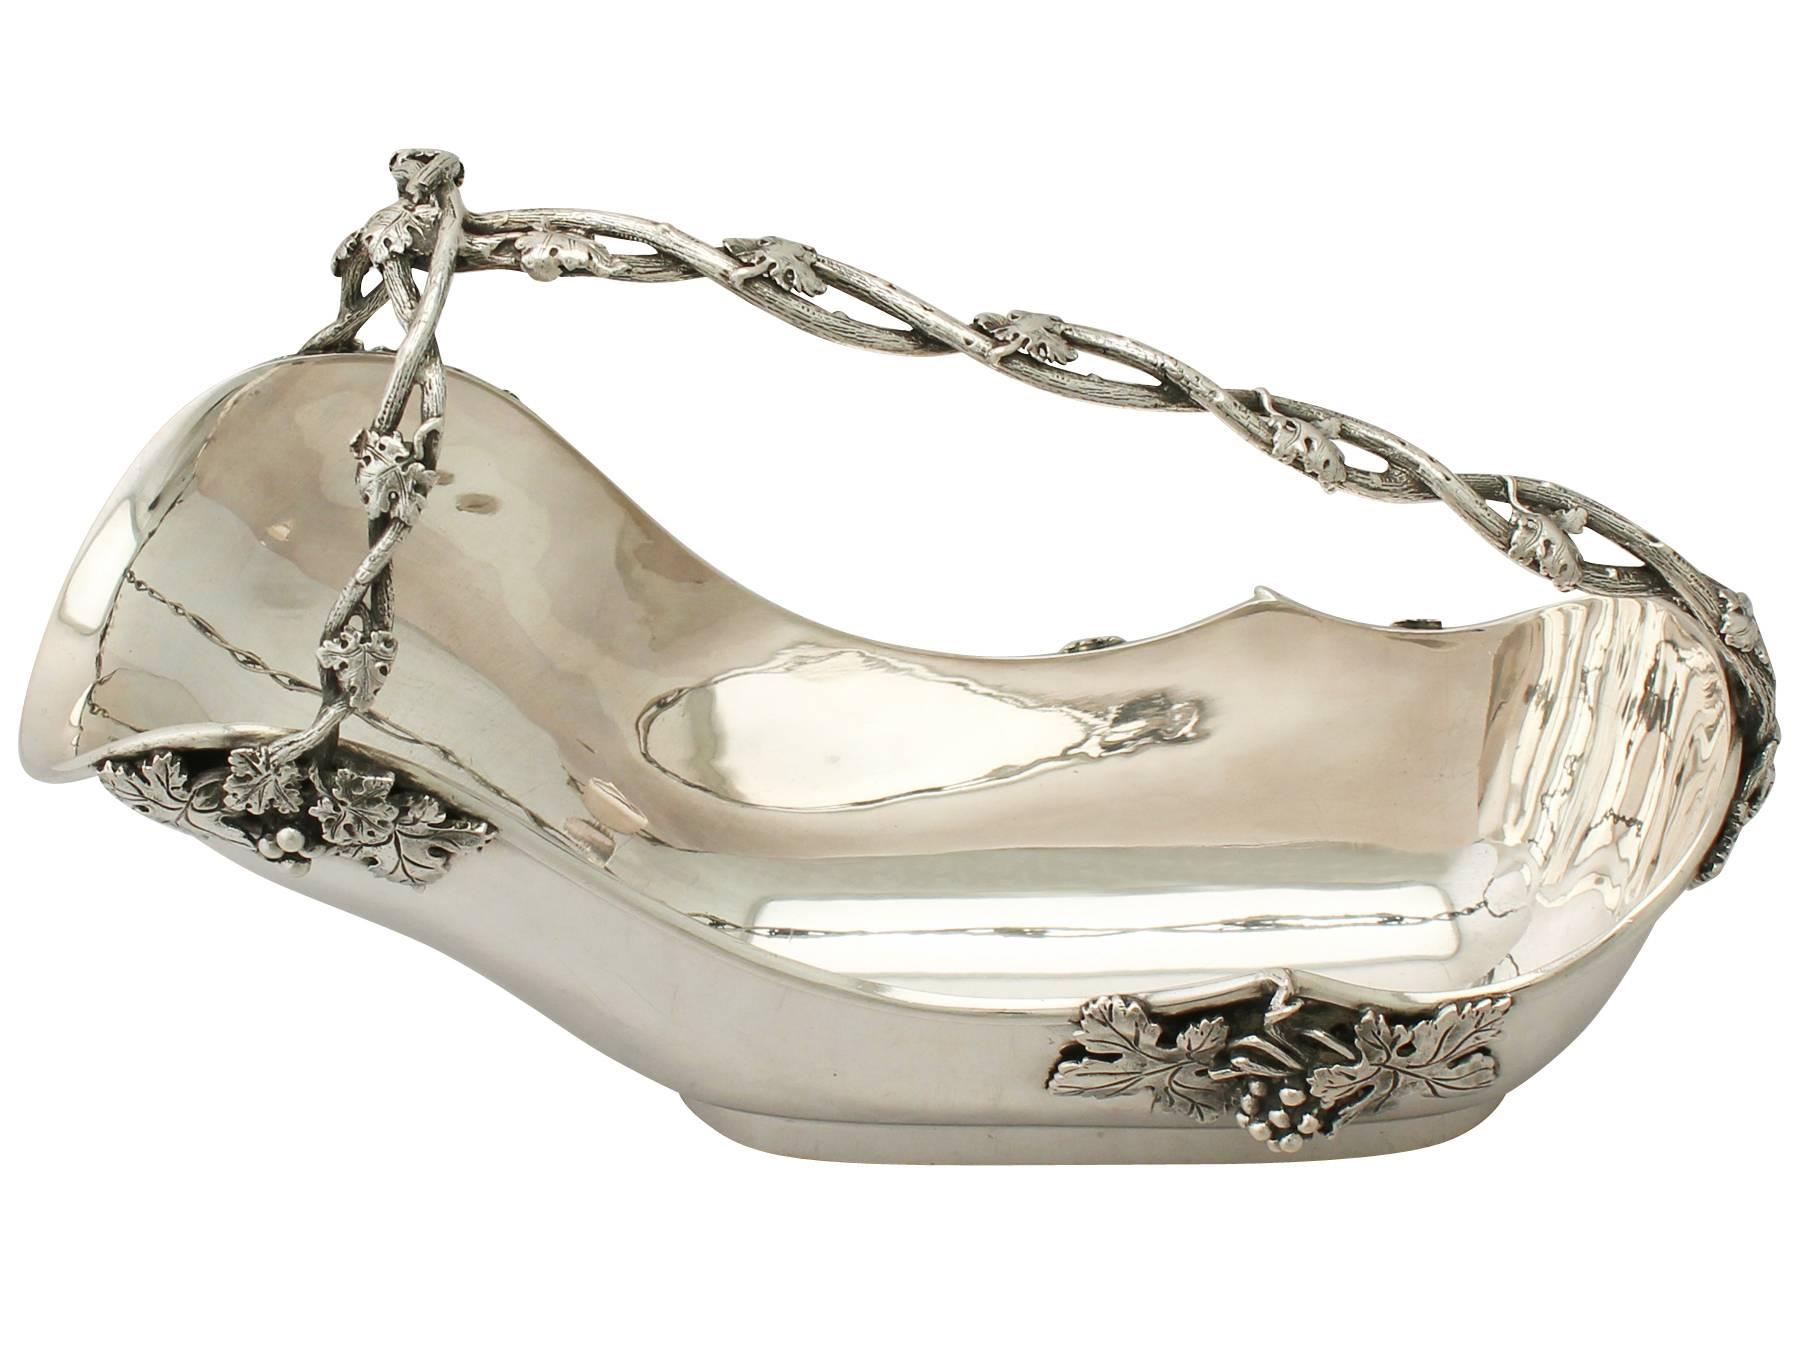 An exceptional, fine and impressive vintage Italian silver bottle holder; an addition to our ornamental silverware collection.

This fine vintage Italian silver bottle holder has an oval rounded form onto an oval collet foot.

The body of this